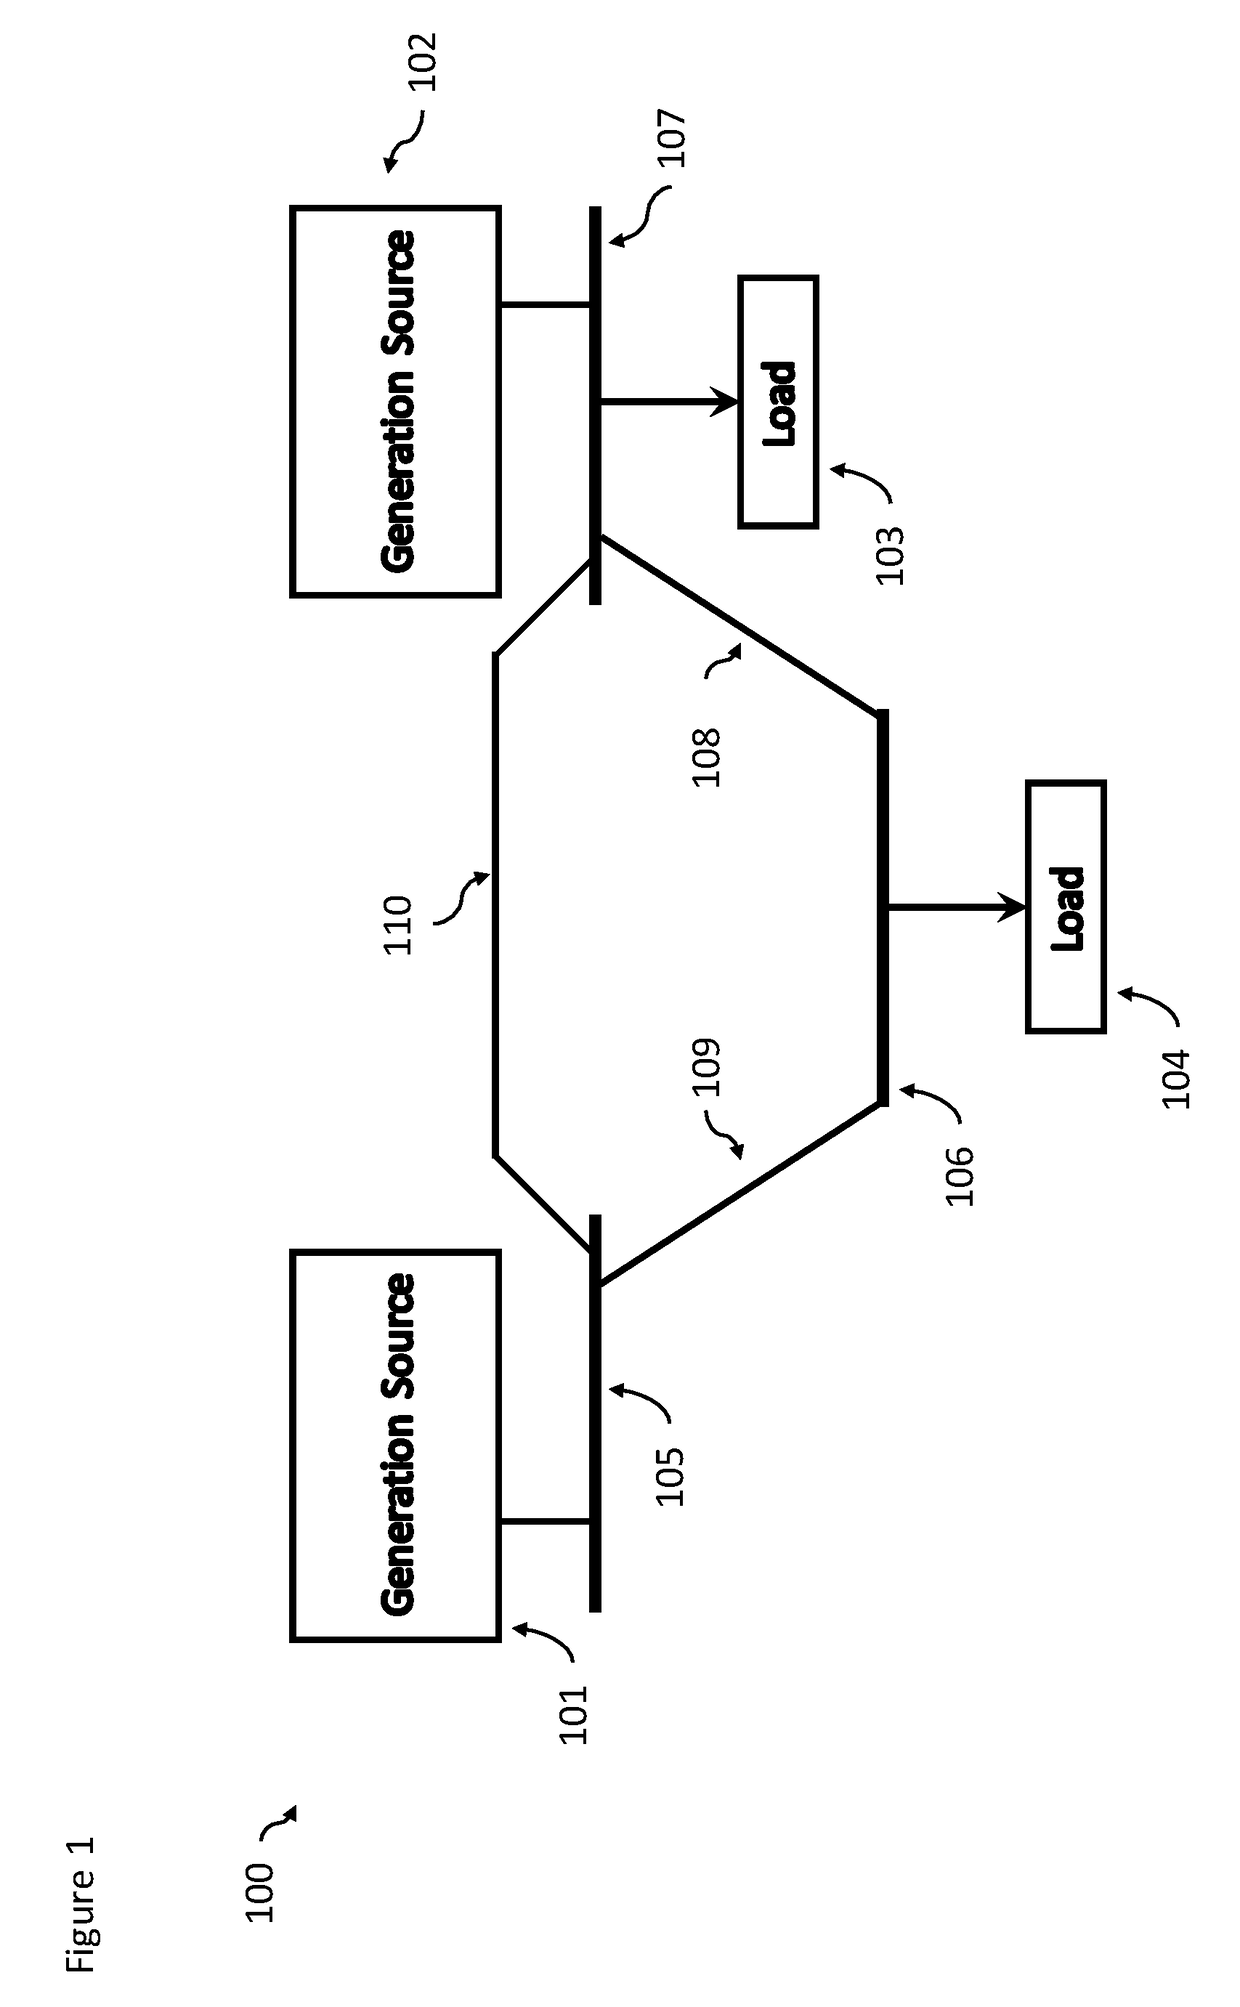 Method and system for mitigating transmission congestion via distributed computing and blockchain technology